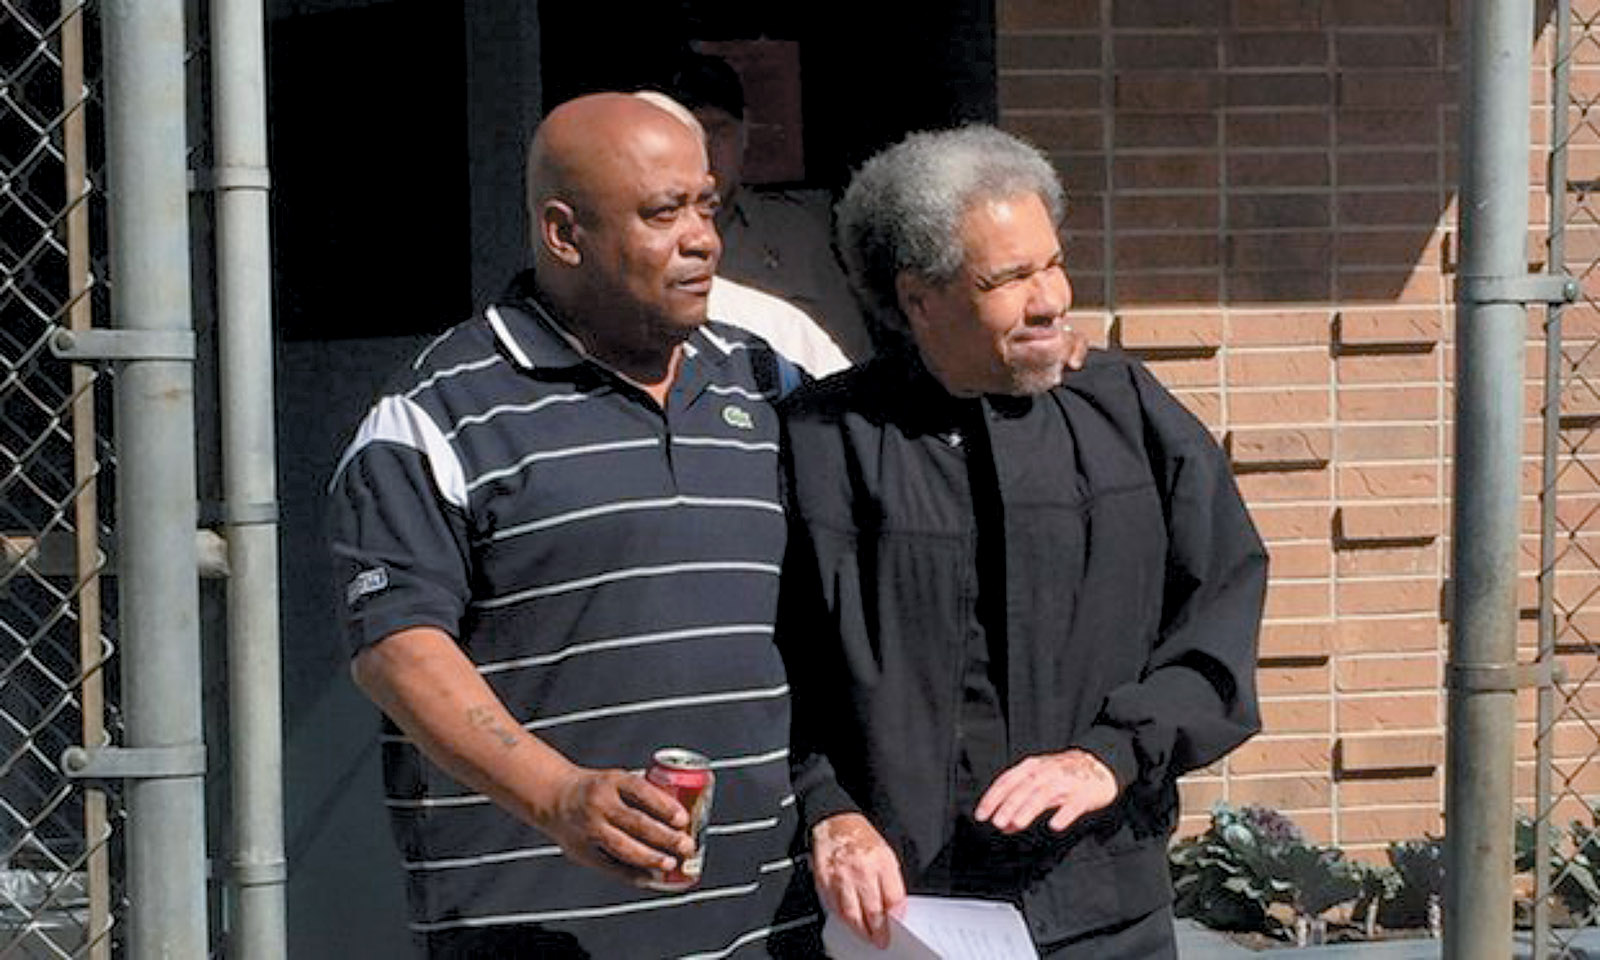 Albert Woodfox (right), accompanied by his brother Michel Mable, leaving West Feliciana Parish Detention Center in Louisiana after forty-three years in solitary confinement, February 2016